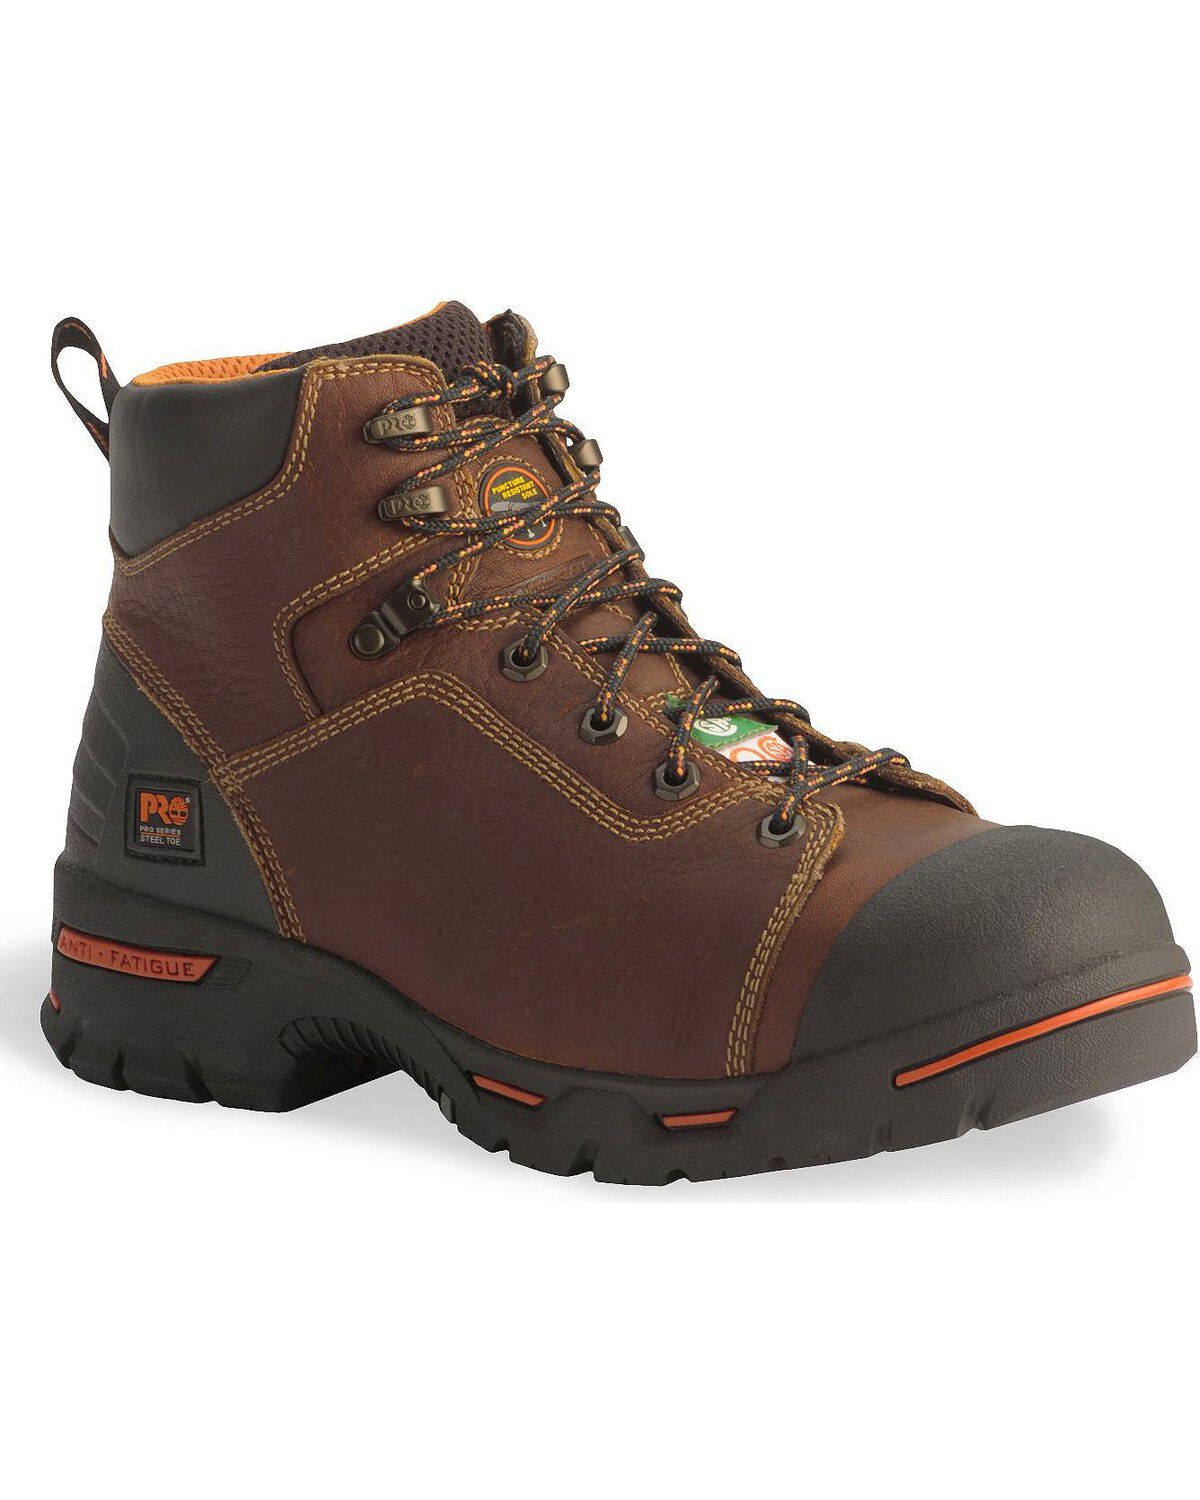 Timberland Pro Work Boots - Boot Barn